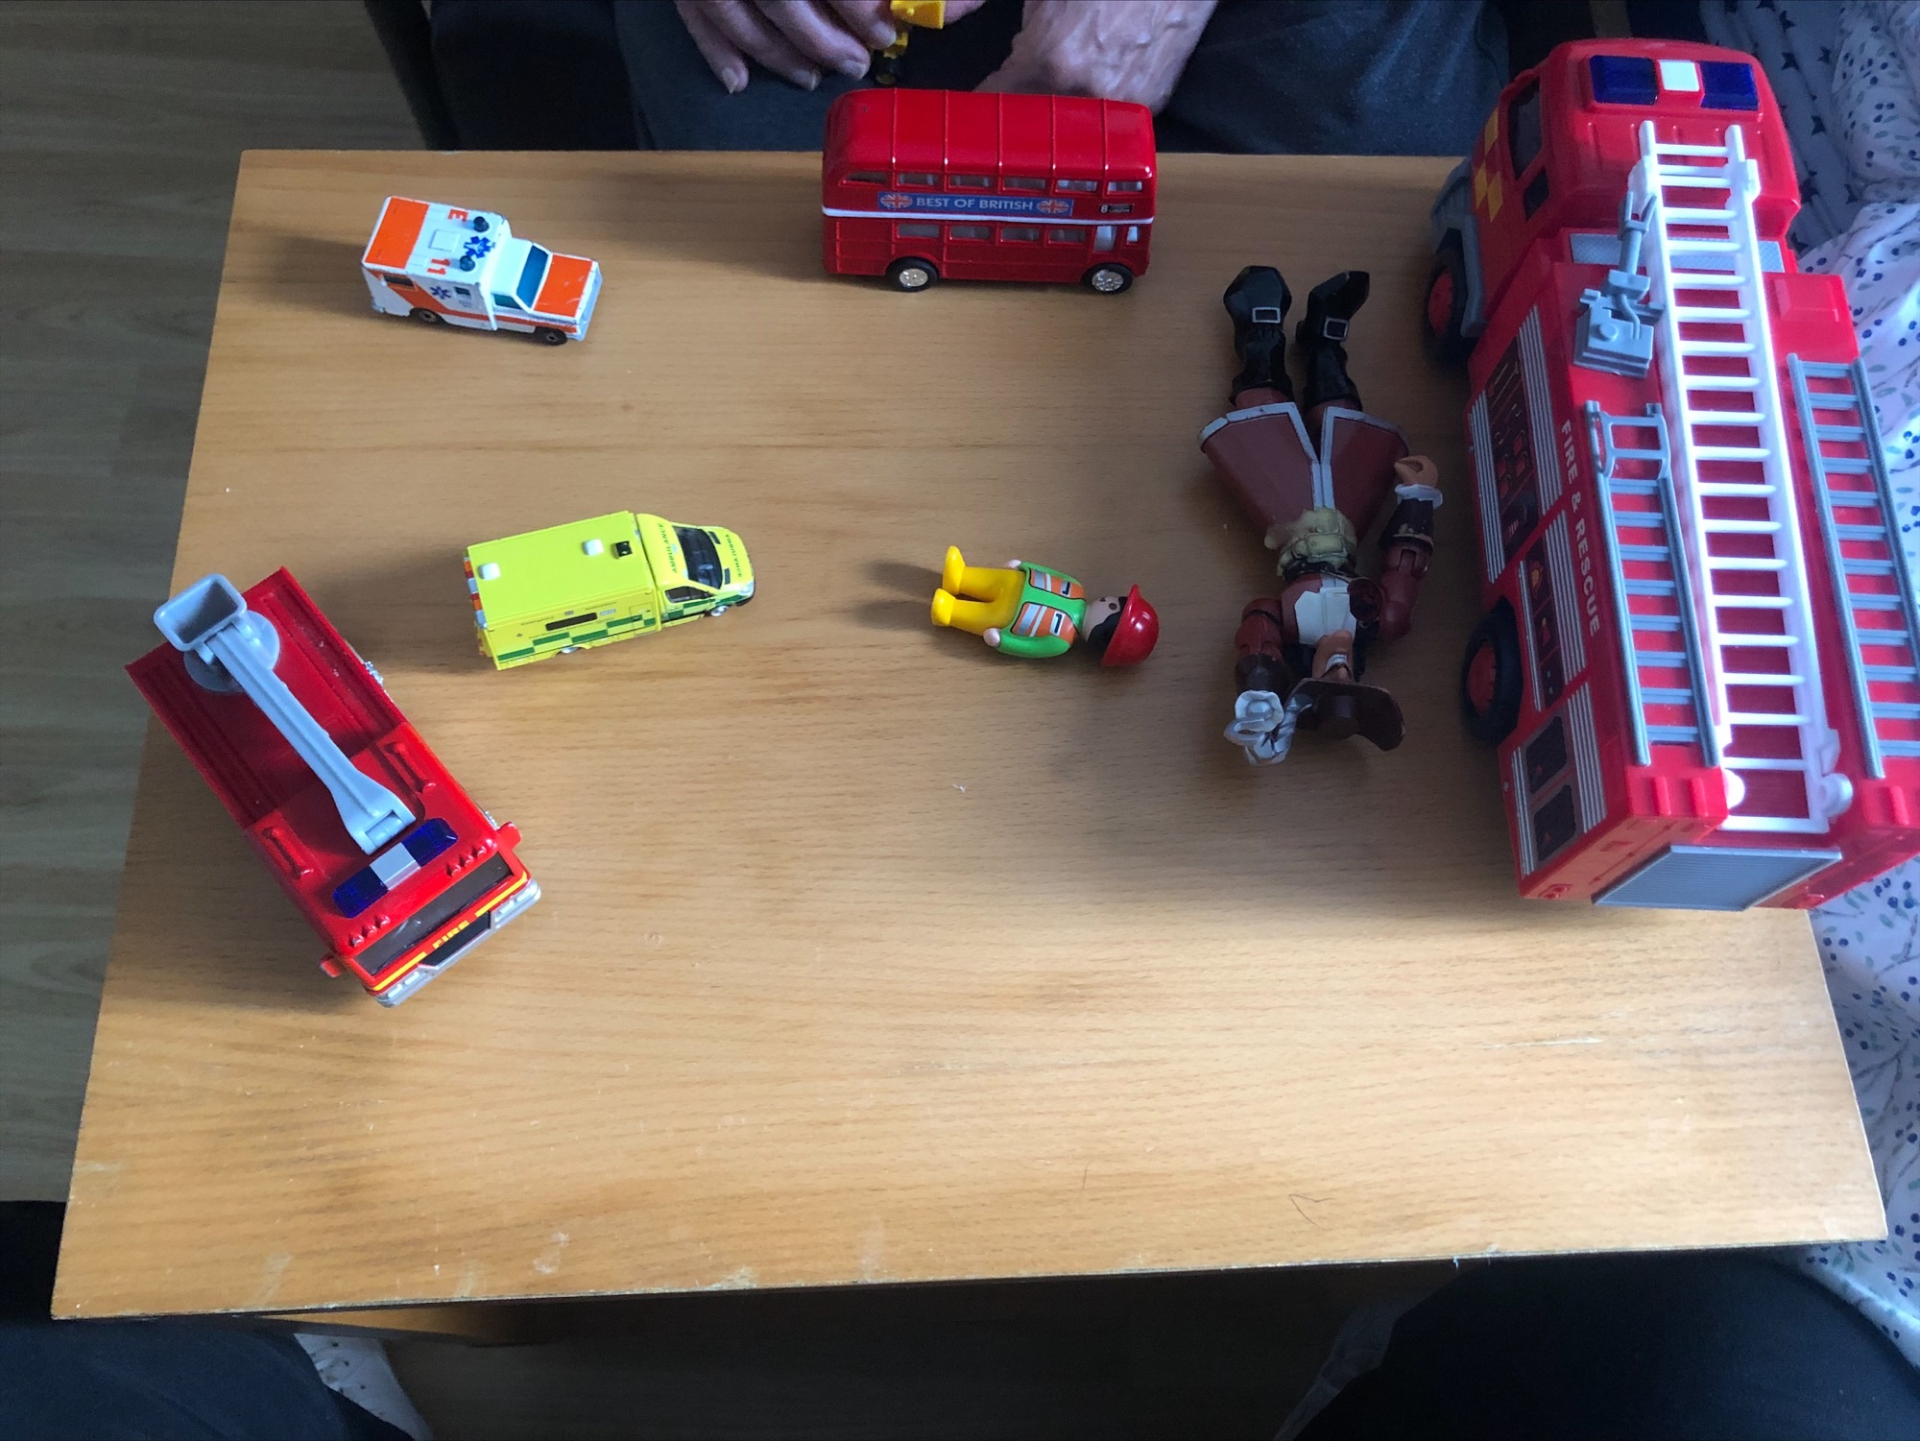 Model vehicles and people on table